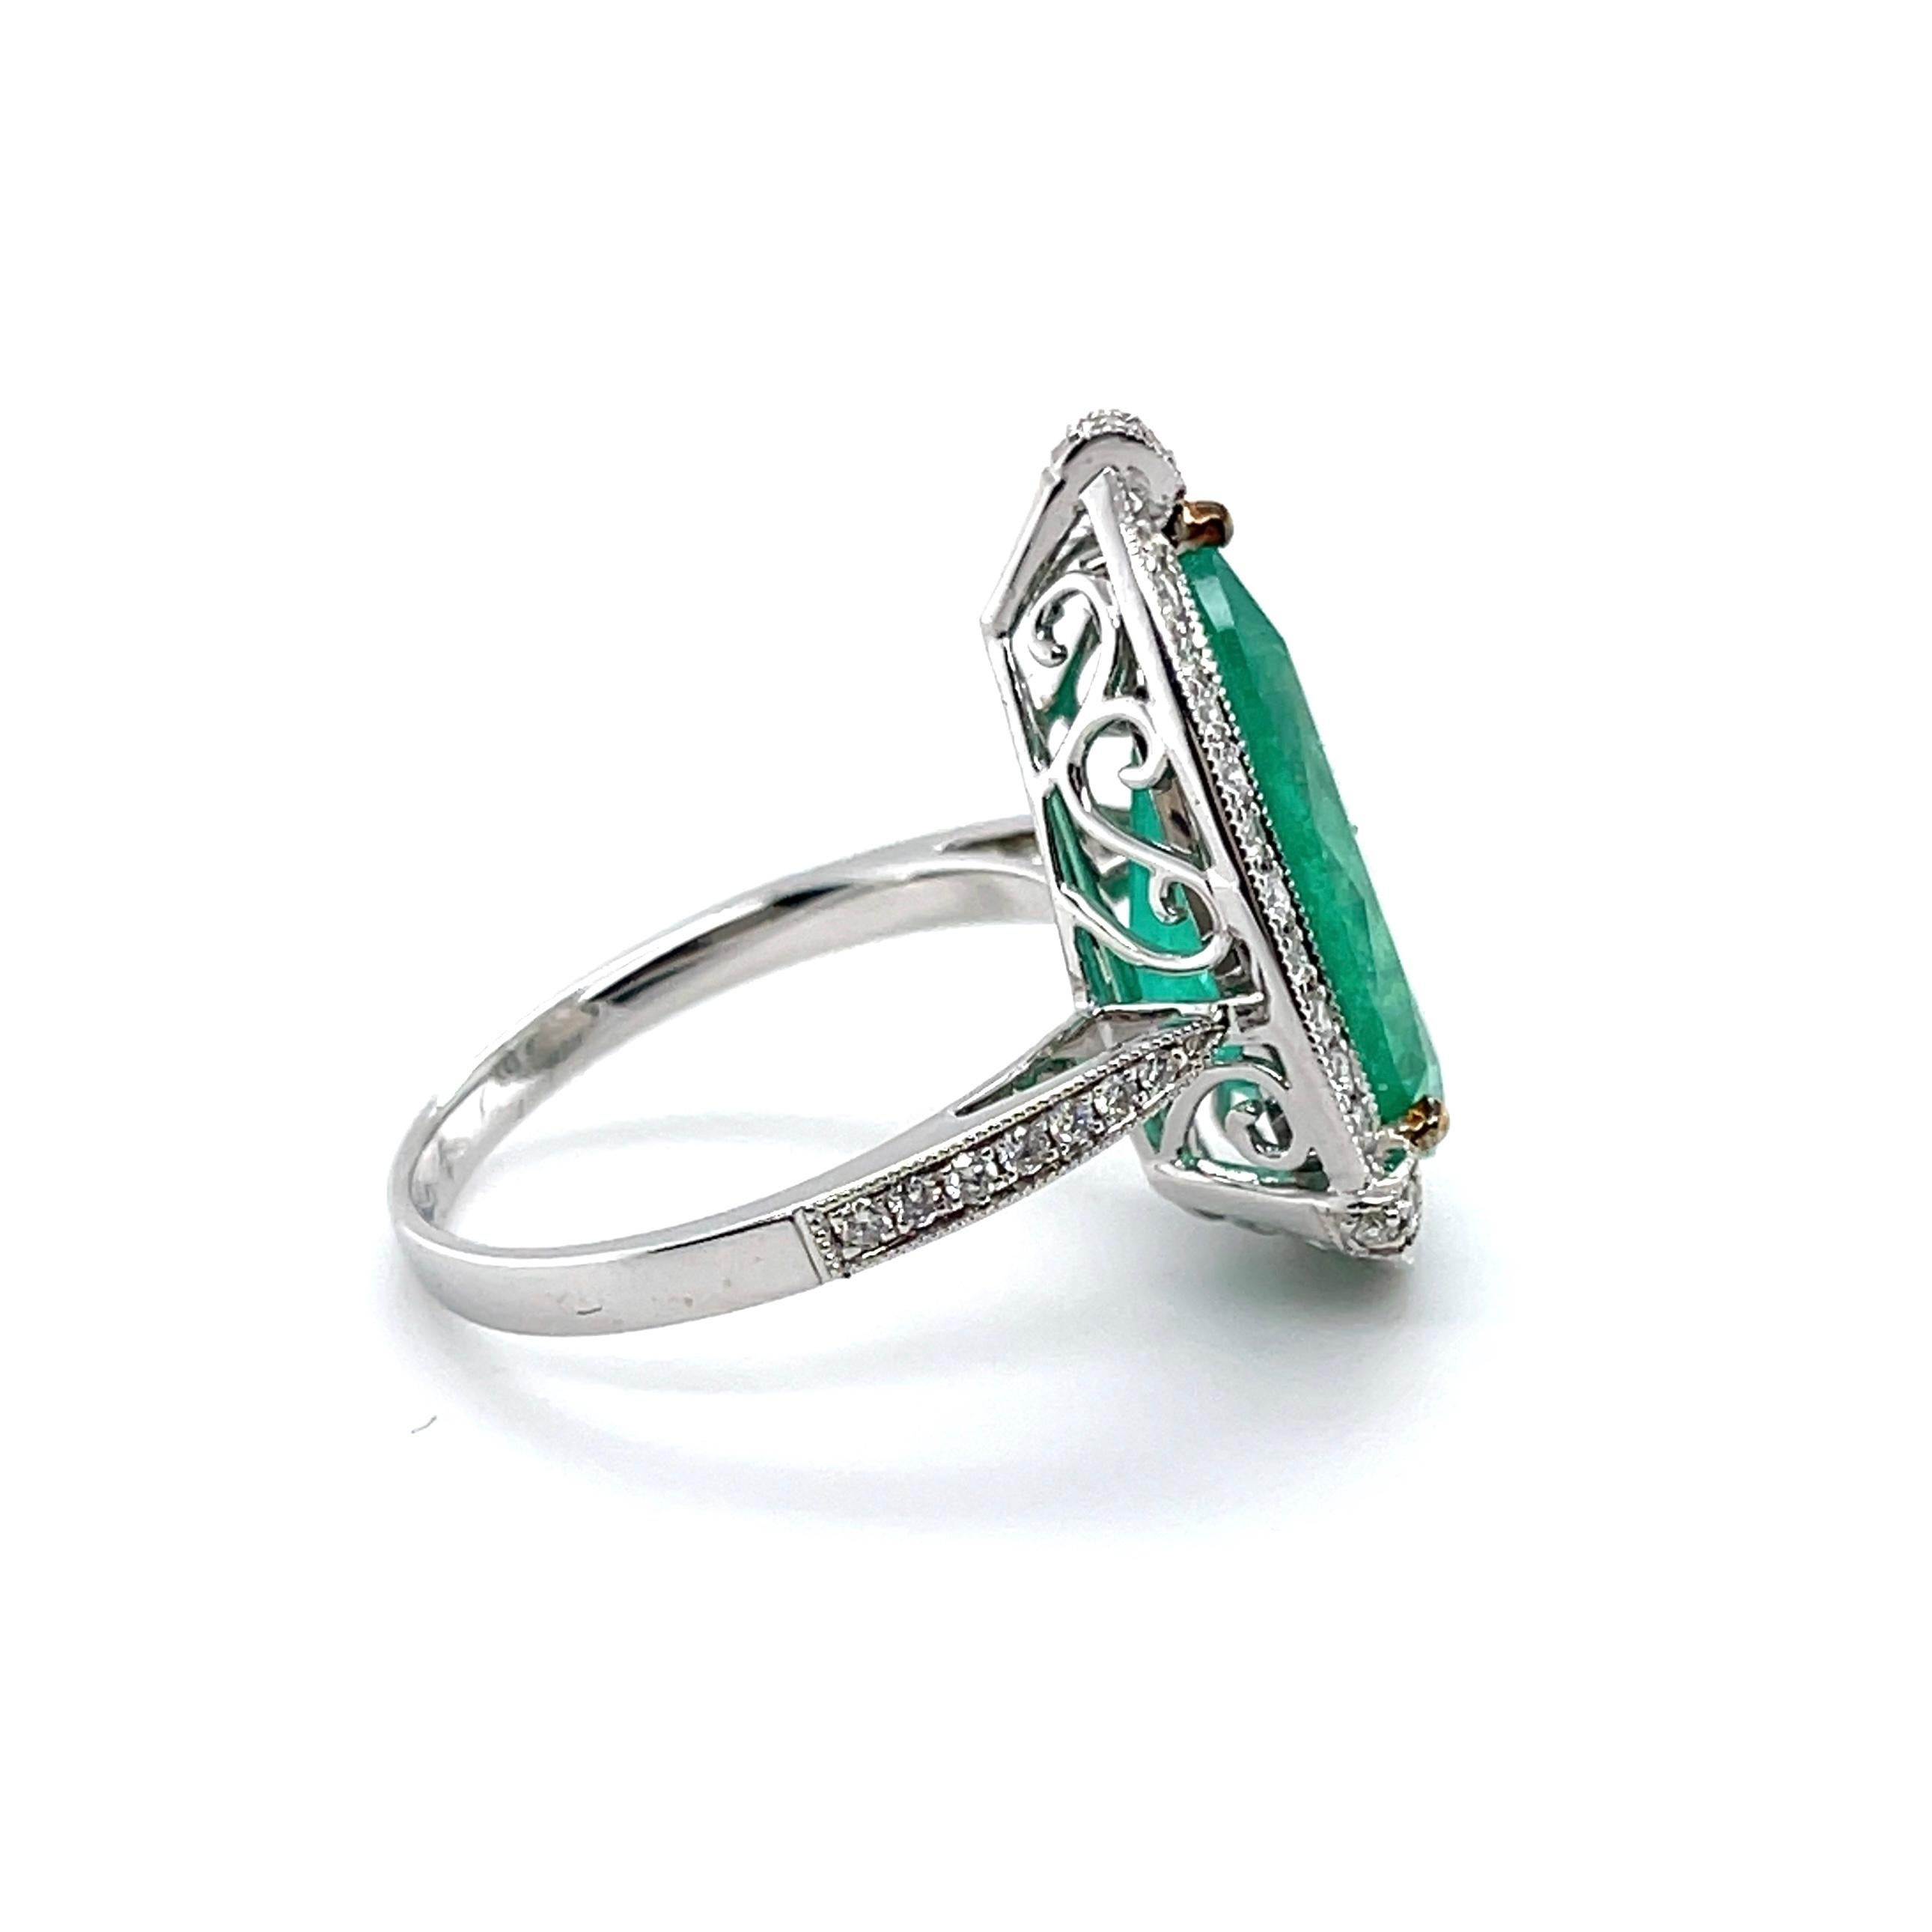 Pear cut Colombian (based on my opinion) emerald, crafted in eighteen karat white gold, featuring a beautiful selections of forty-nine claw set round brilliant cut diamonds. complimented with a polished finish design,

Emerald weight: 5.99ct